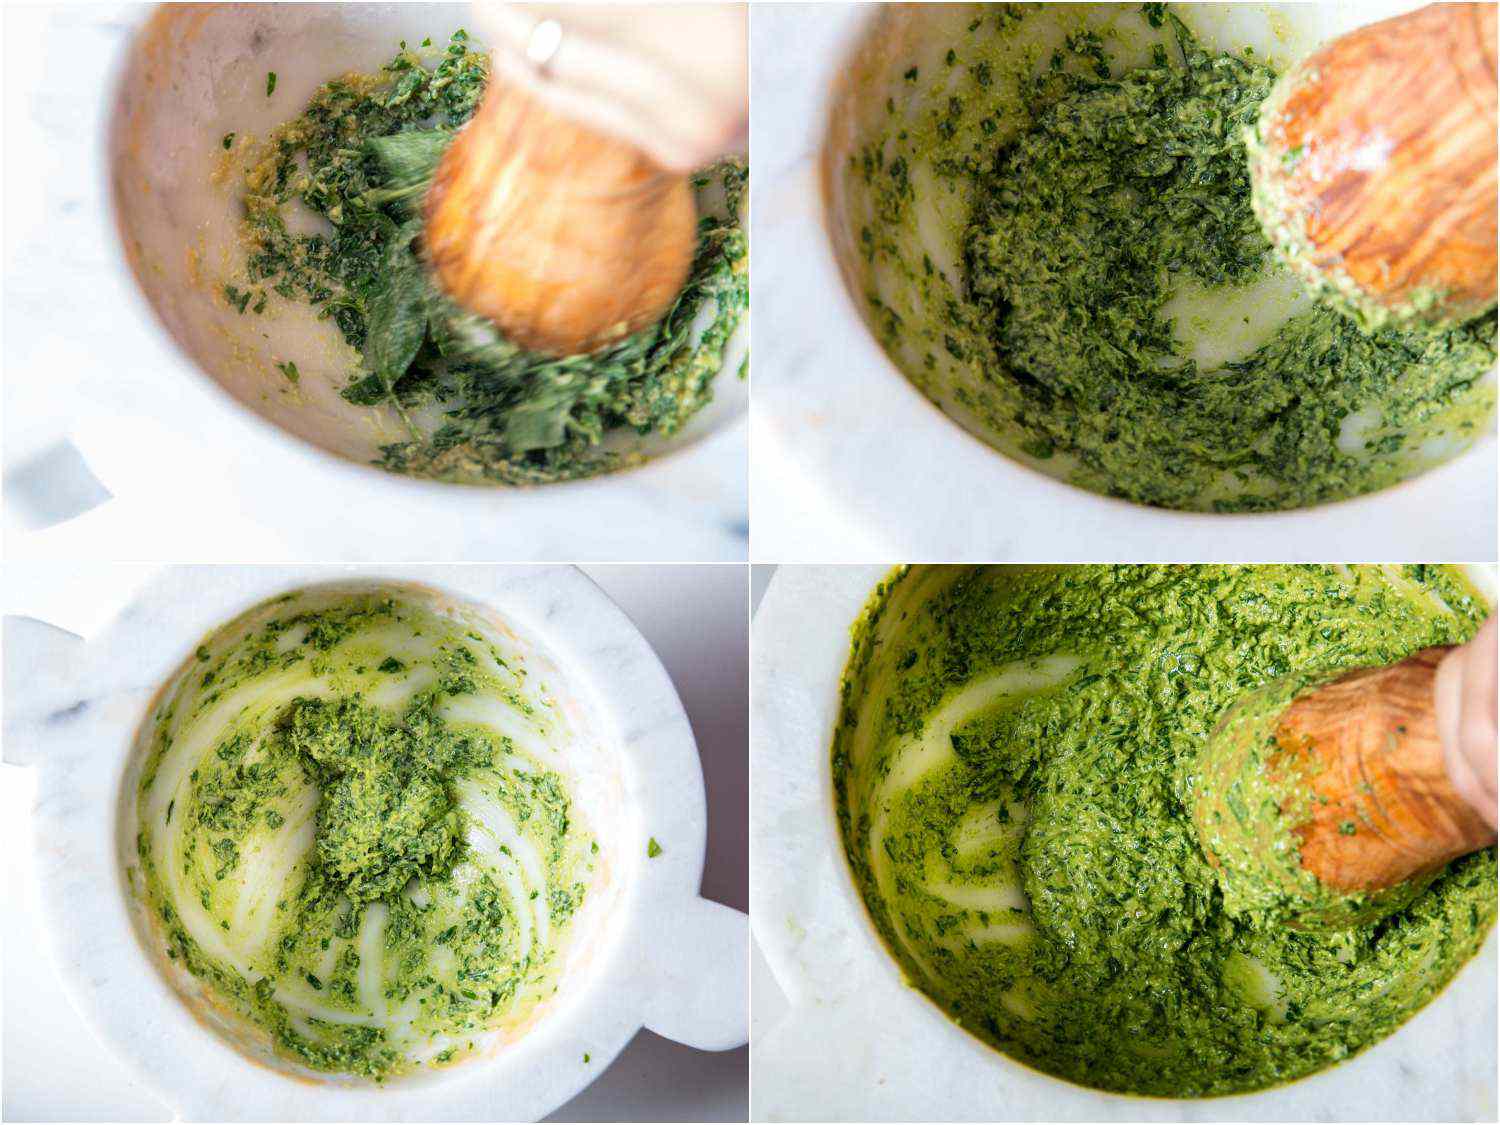 Photo collage showing pounding basil leaves into garlic and pine nuts to make pesto sauce in a marble mortar with wooden pestle.